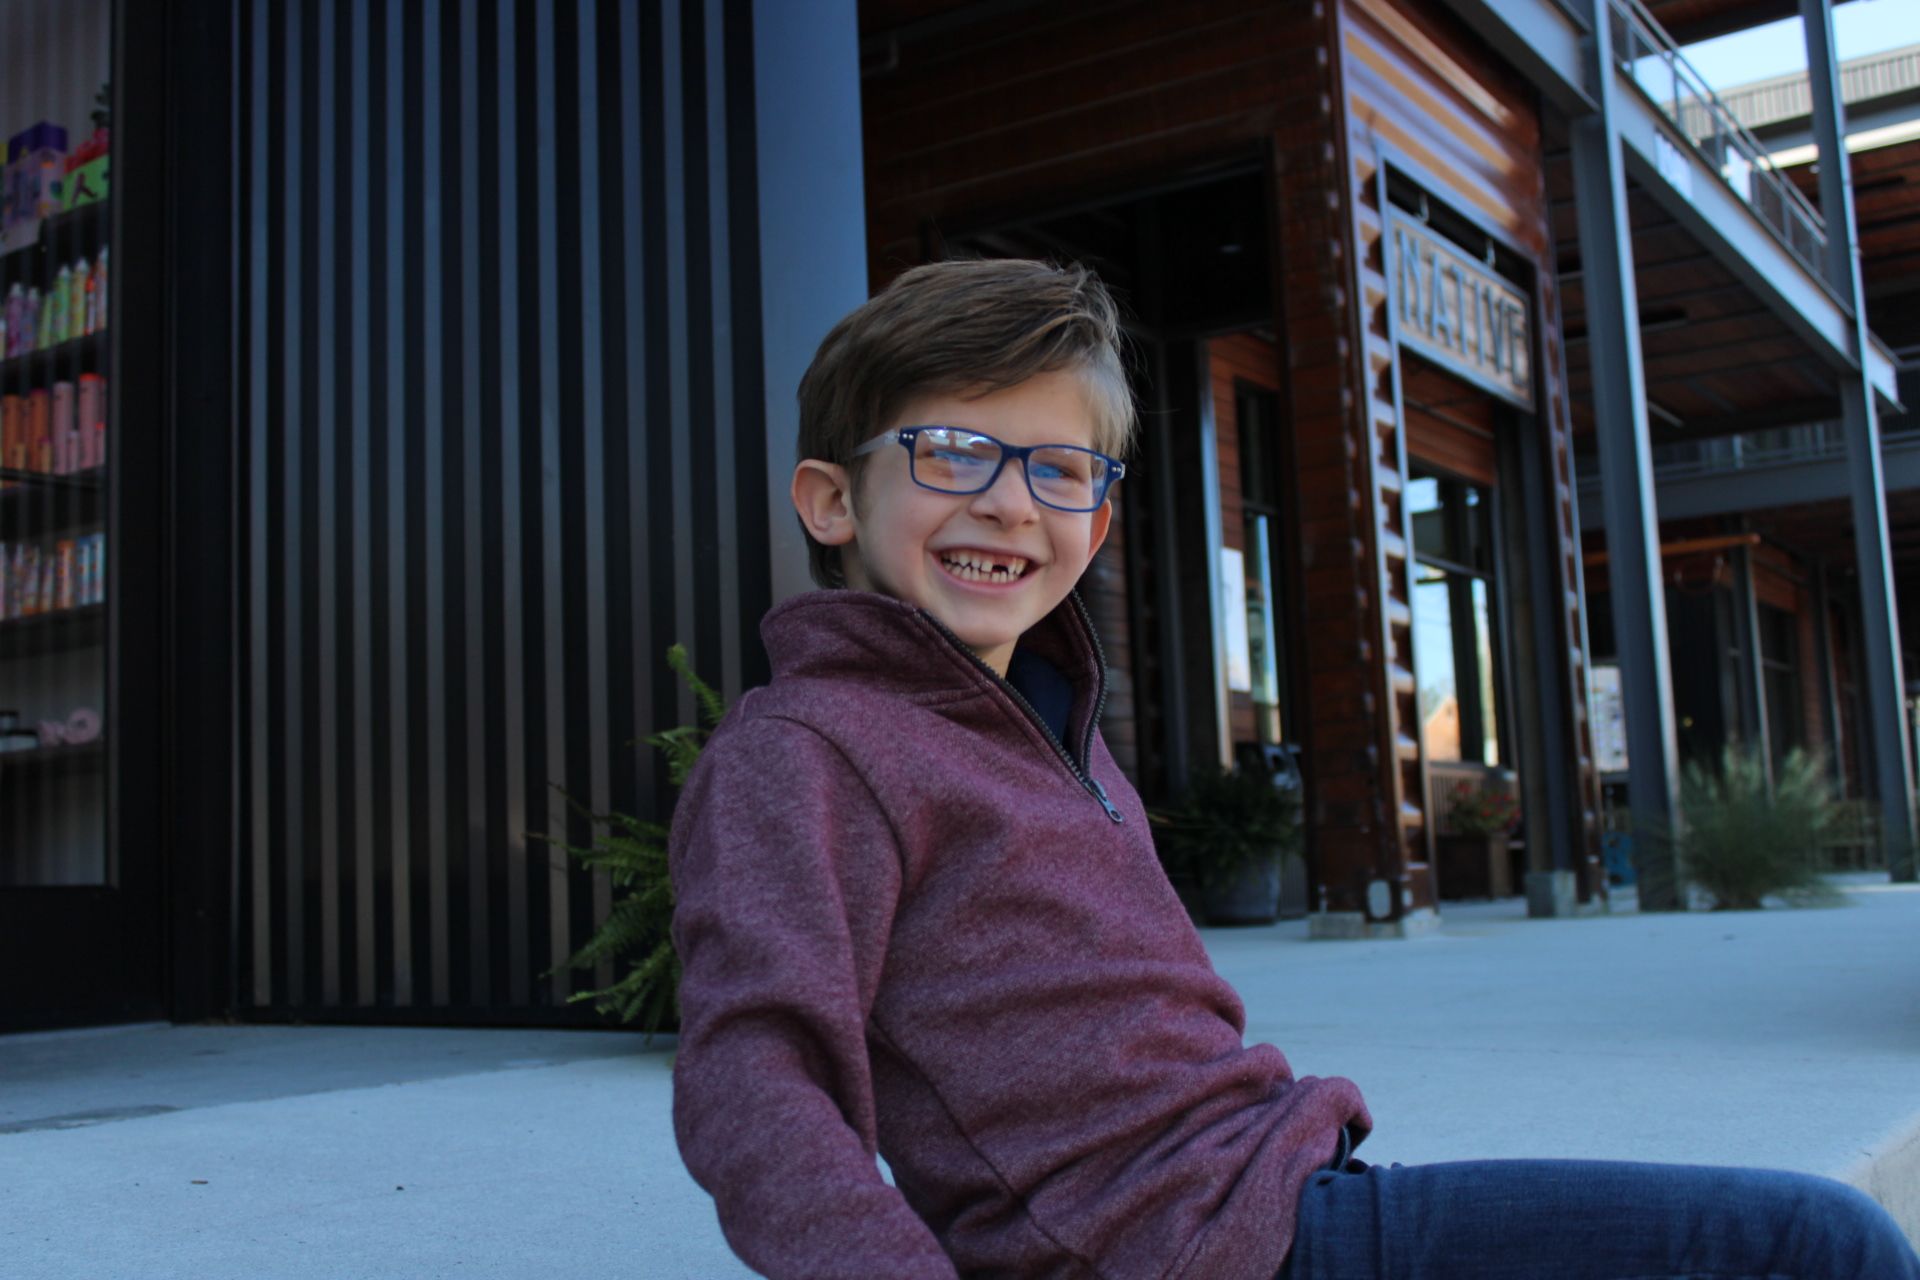 exterior CustomEyes eyewear boutique and optician, young boy smiling at the camera wearing glasses